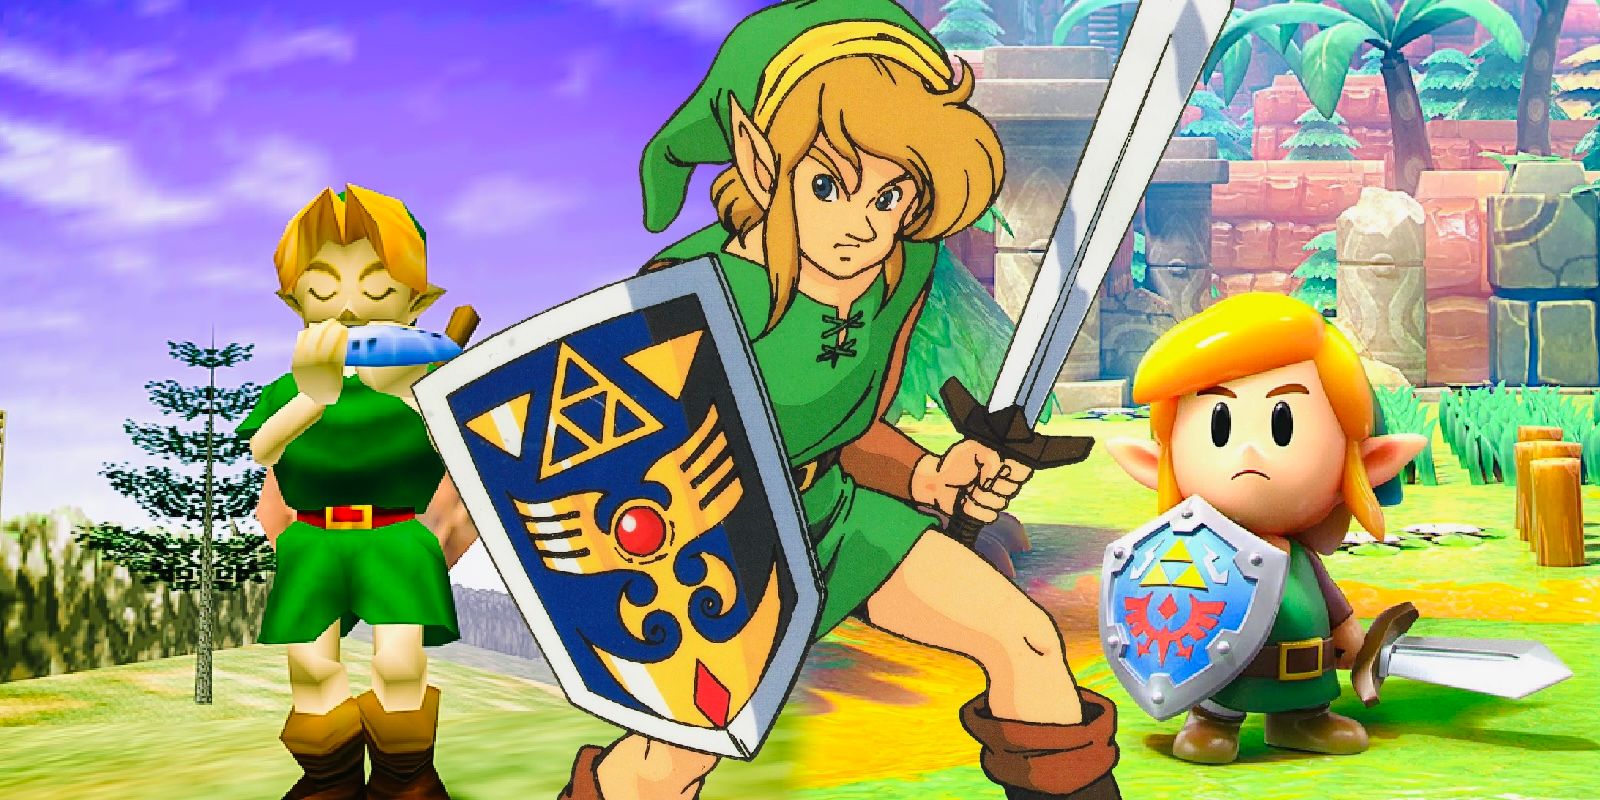 Ocarina Of Time Began Life As A Remake Of Zelda II: The Adventure